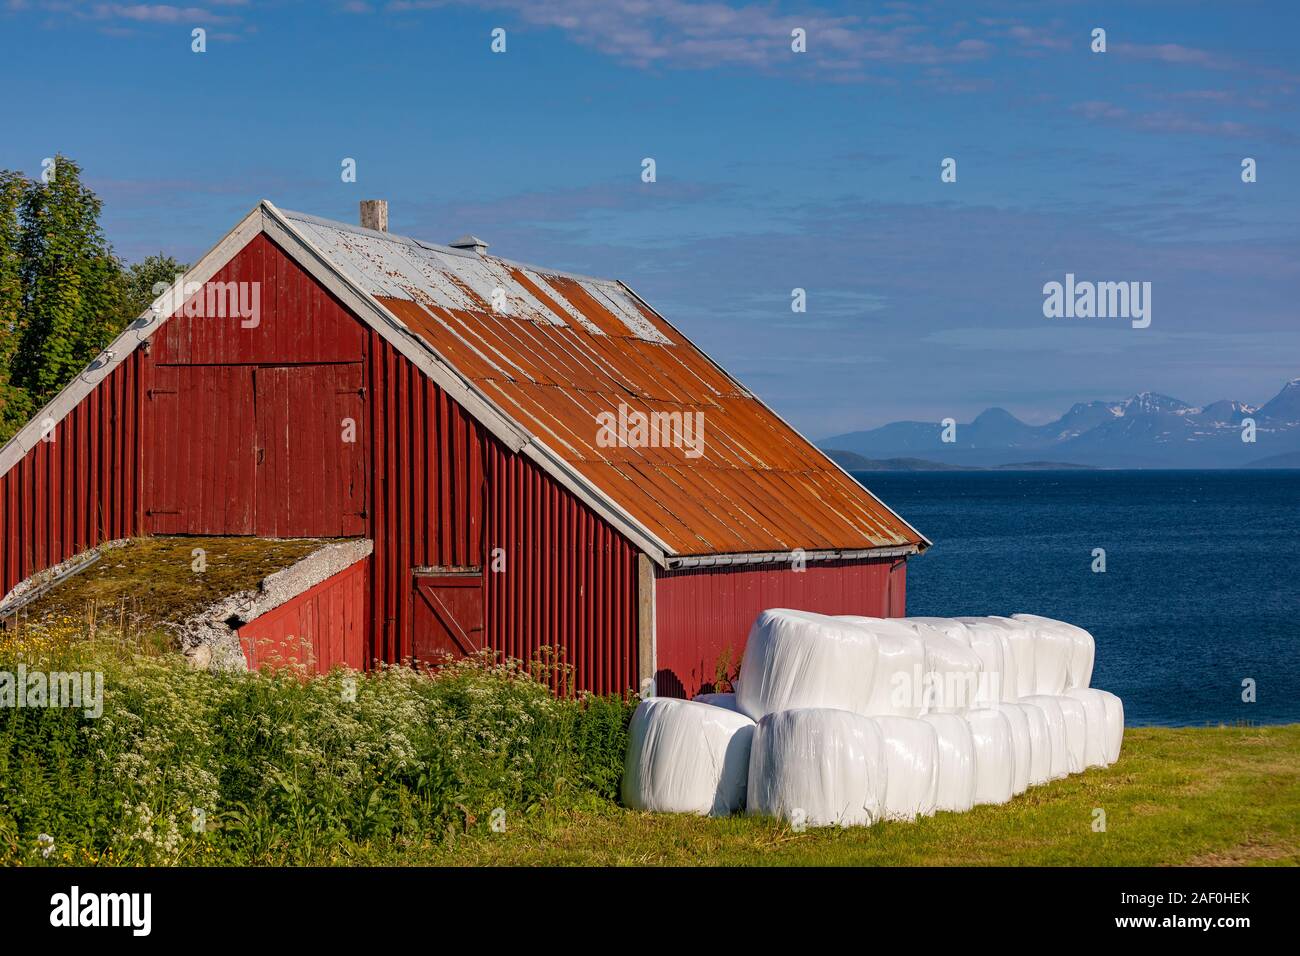 BAKKEJORD, KVALØYA ISLAND, TROMS, NORWAY - Red barn and round hay bales, and view of fjord. Stock Photo